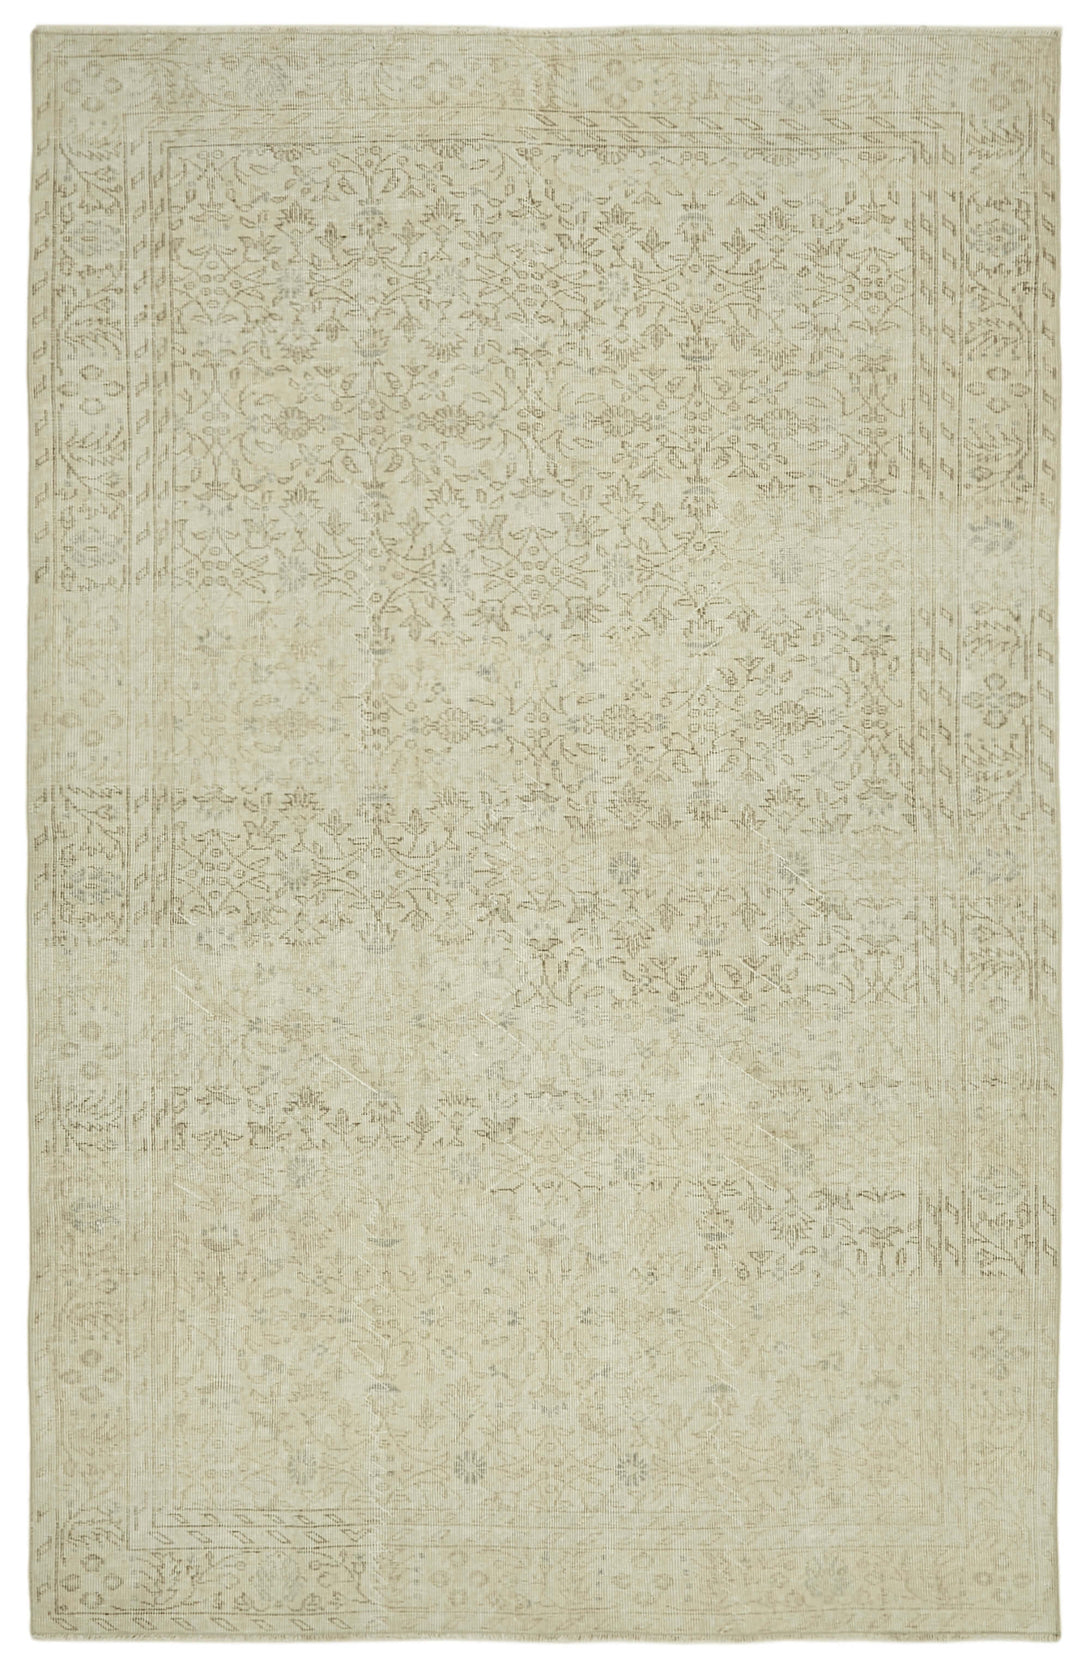 Handmade White Wash Area Rug > Design# OL-AC-41408 > Size: 6'-5" x 9'-9", Carpet Culture Rugs, Handmade Rugs, NYC Rugs, New Rugs, Shop Rugs, Rug Store, Outlet Rugs, SoHo Rugs, Rugs in USA